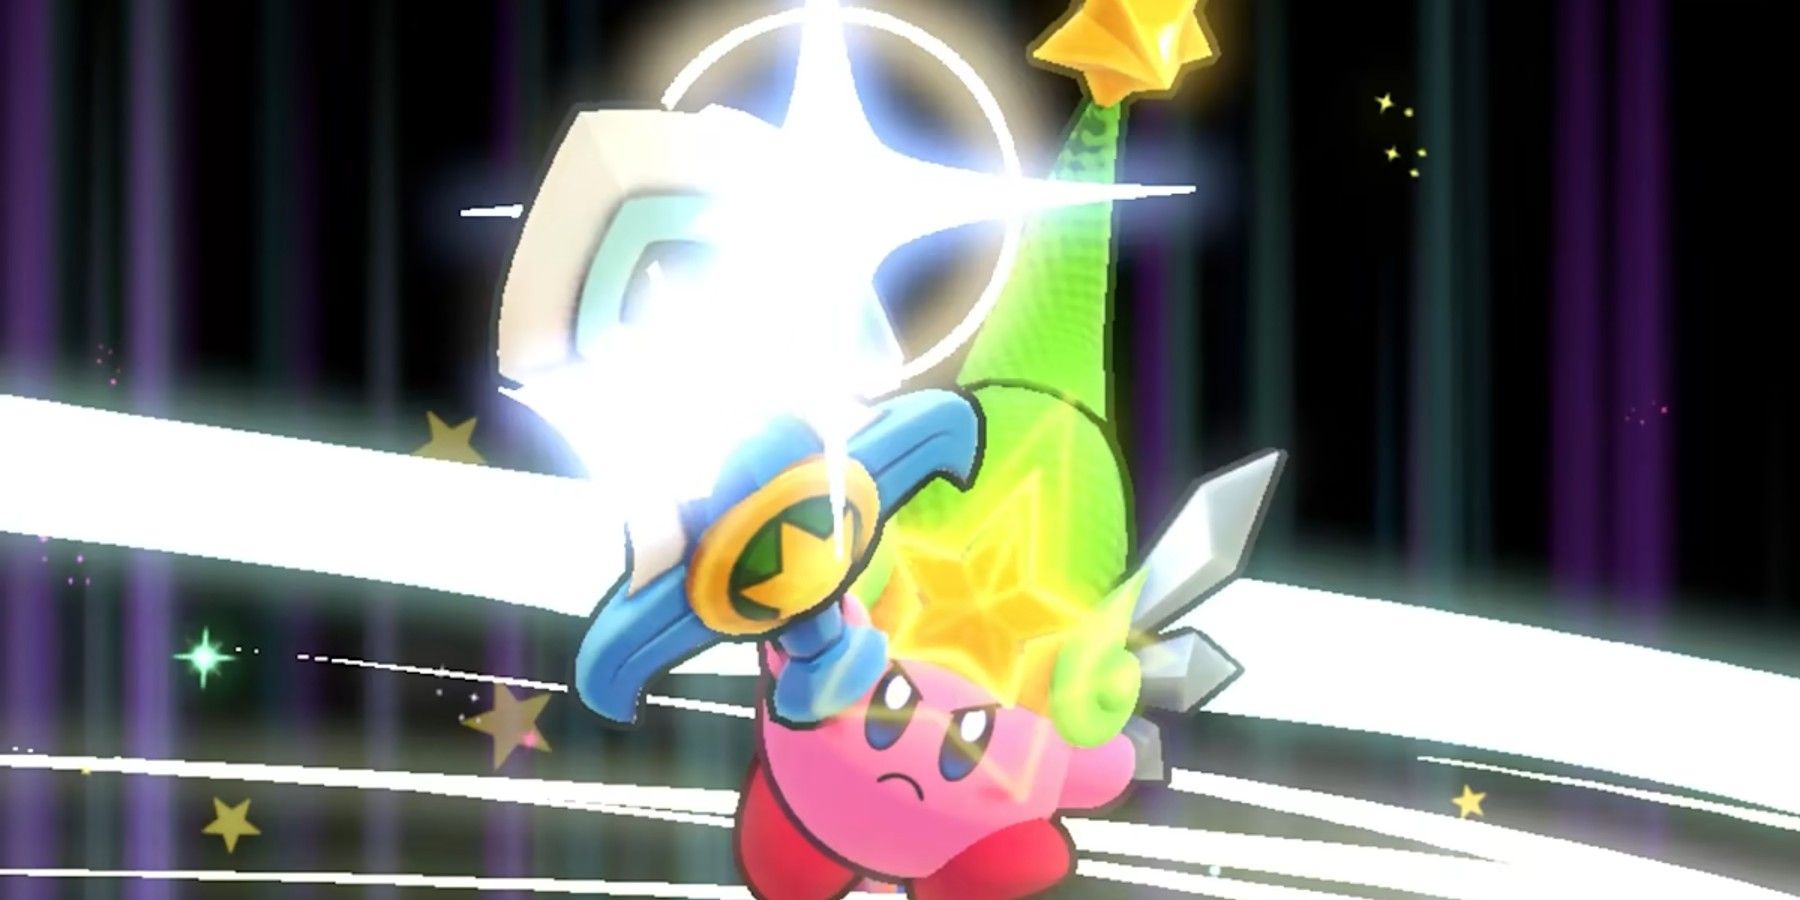 Kirby with a sword in Kirby's Return to Dream Land Deluxe